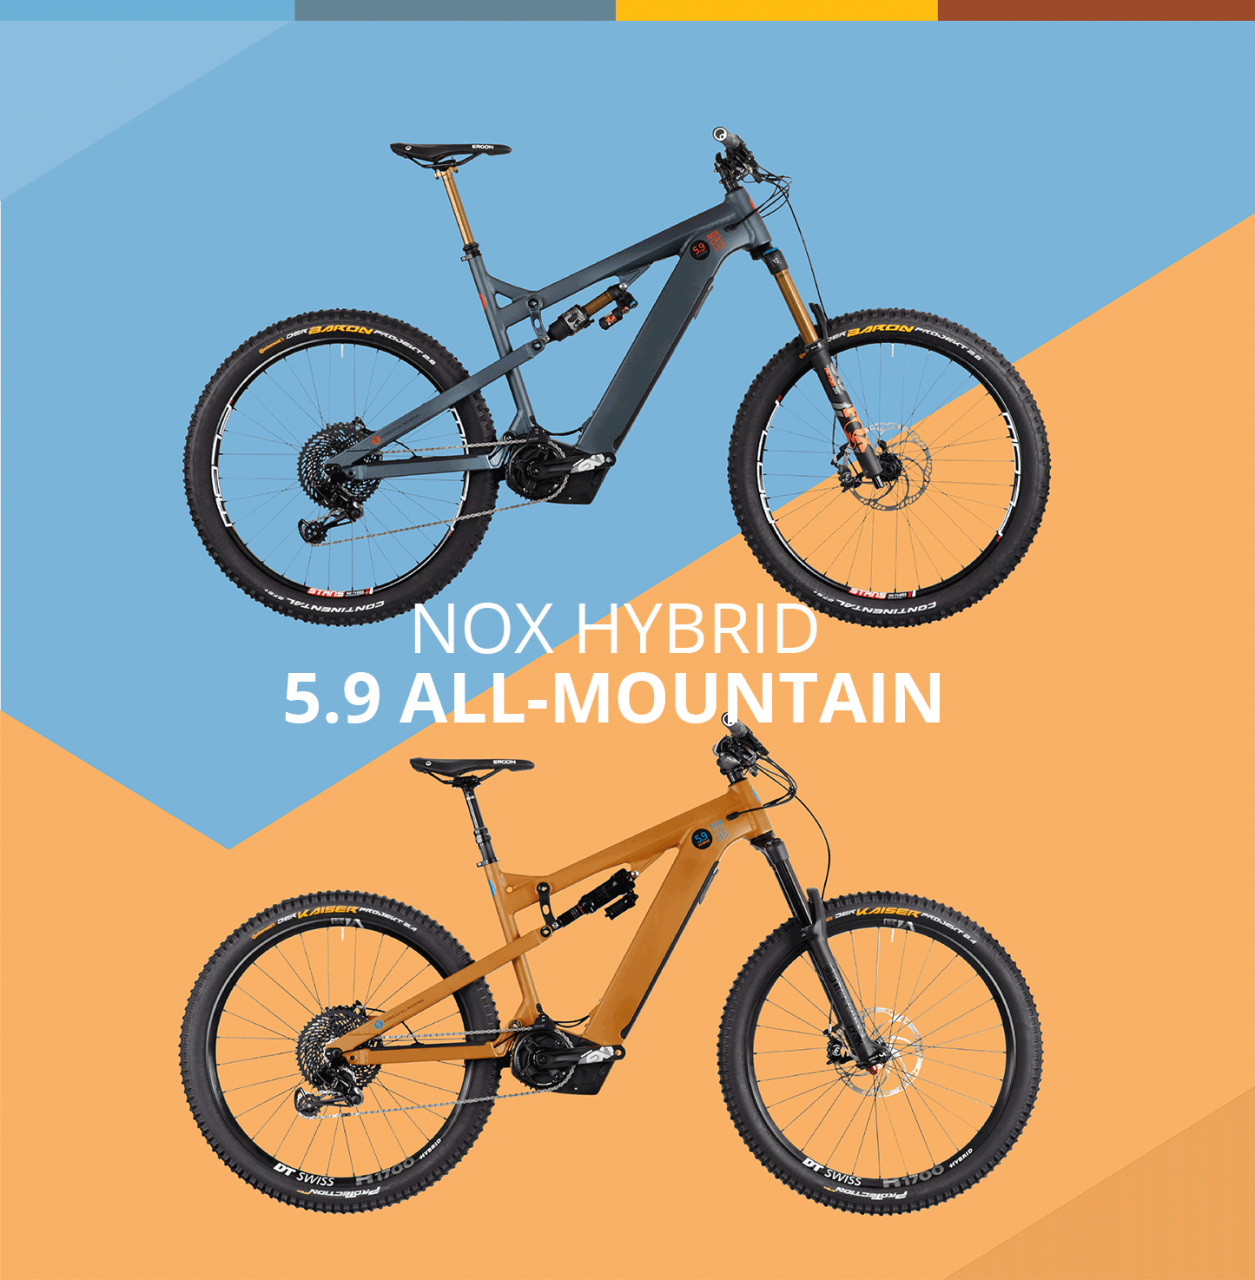 all-mountaint_20_1280x1280.png